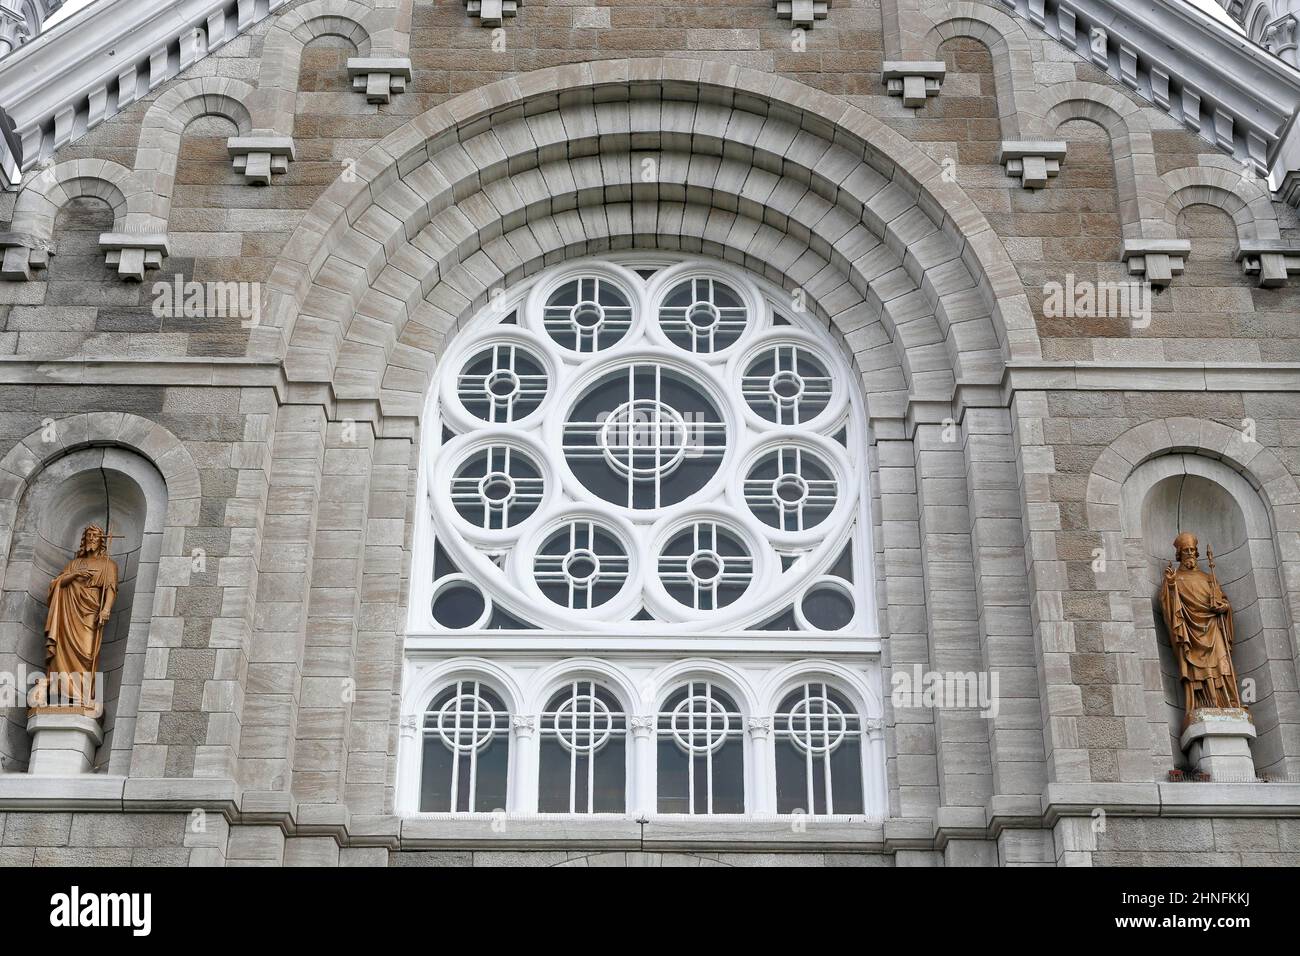 Facade of the Saint Timothy Catholic Church, Province of Quebec, Canada Stock Photo